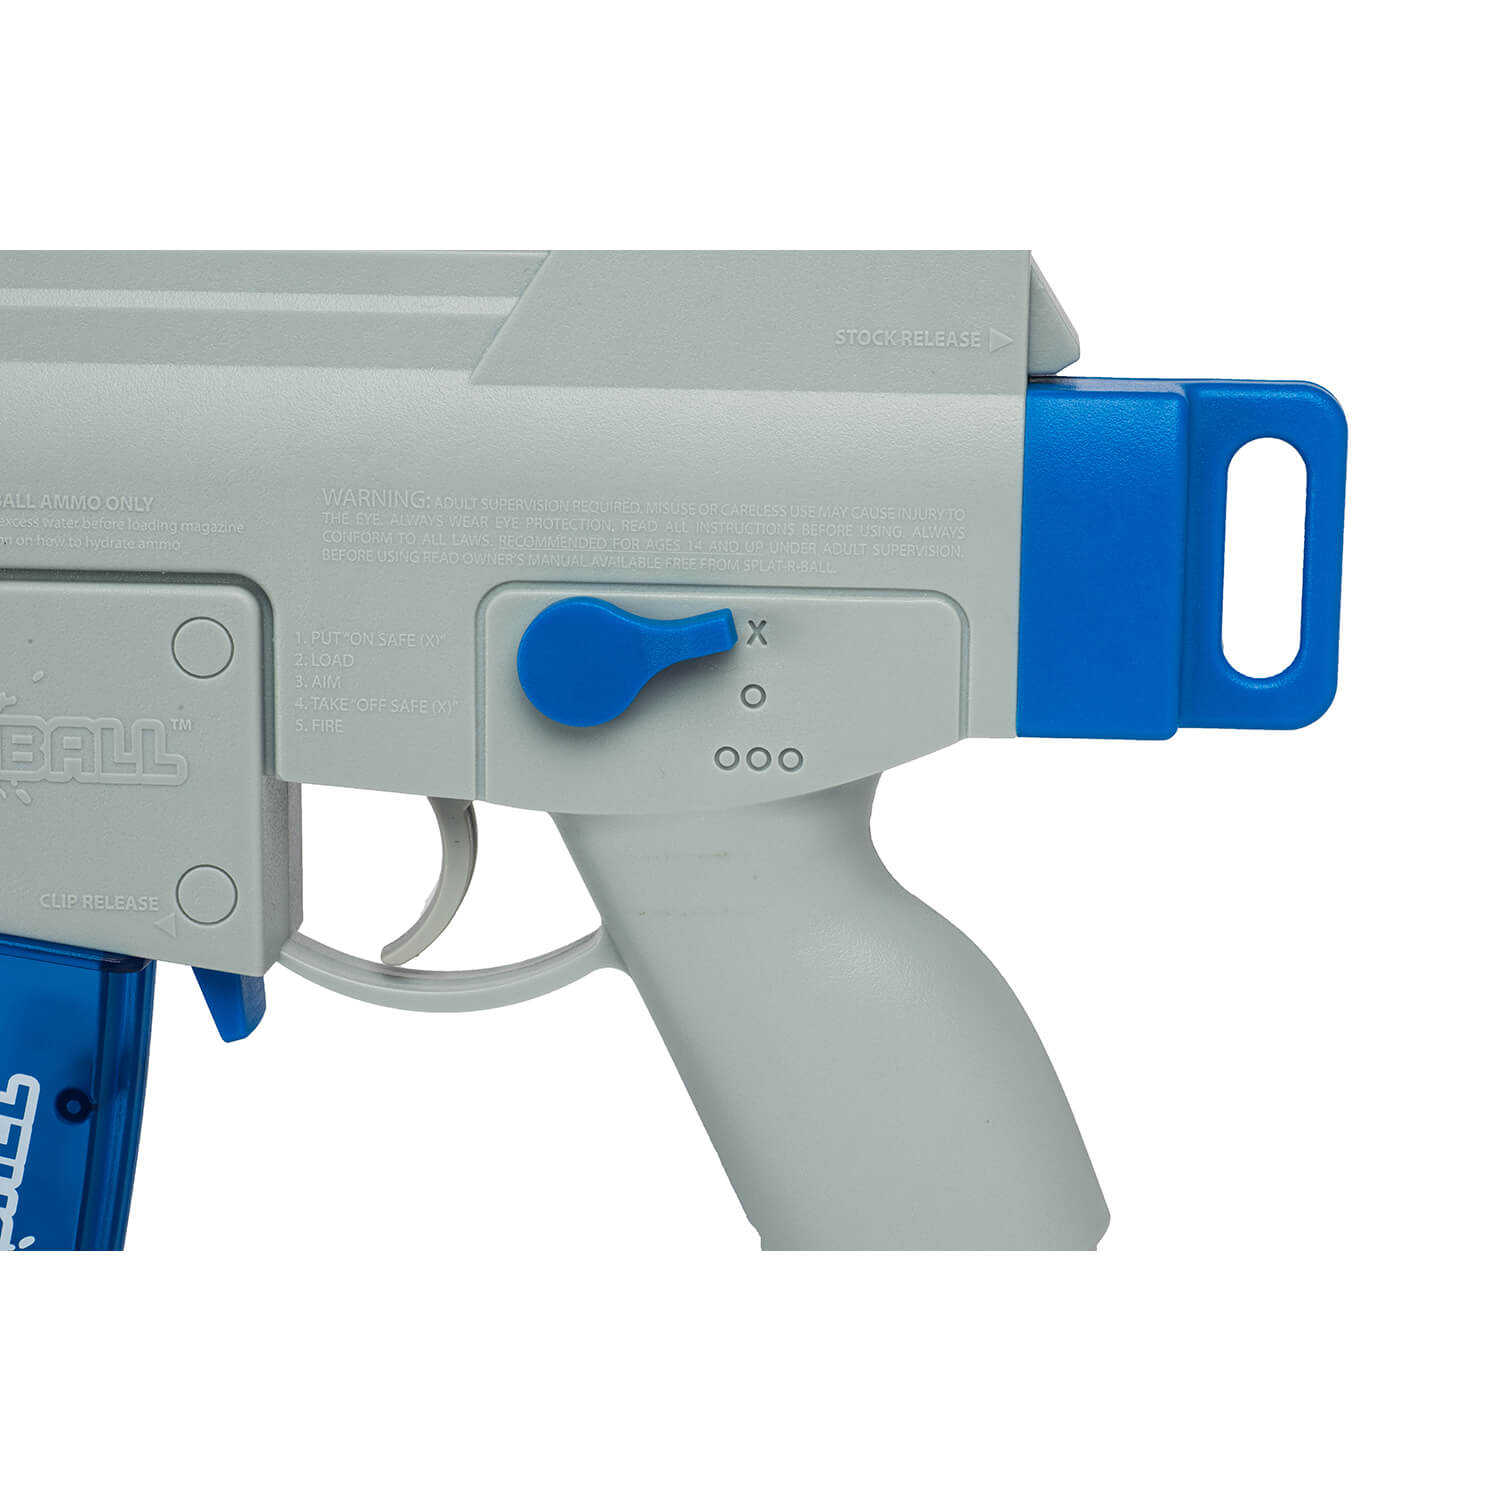 Large Gel Ball Blaster with Drum & Mag, Automatic and Manual Splatter  Blaster, Electric Splat Blaster (Blue)